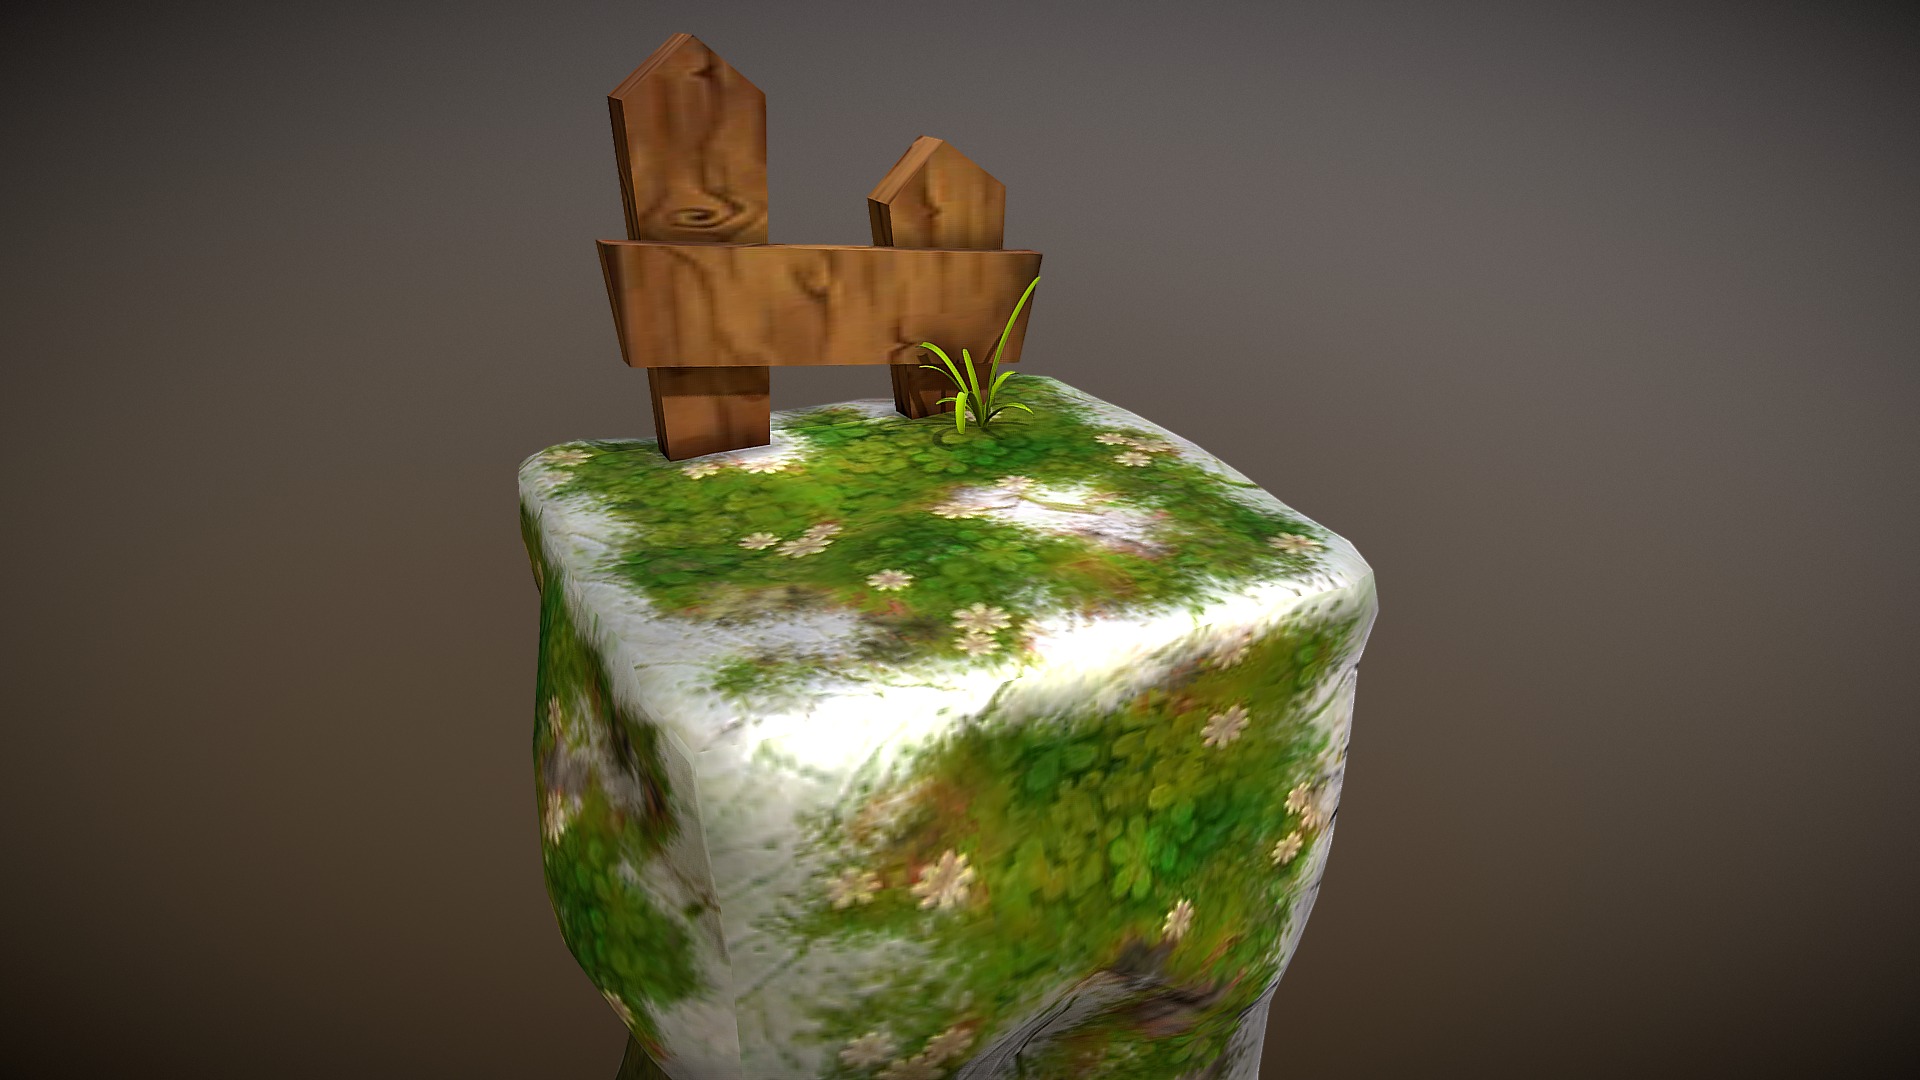 3D model Platform-jungle - This is a 3D model of the Platform-jungle. The 3D model is about a green and white object with a wooden figure on top.